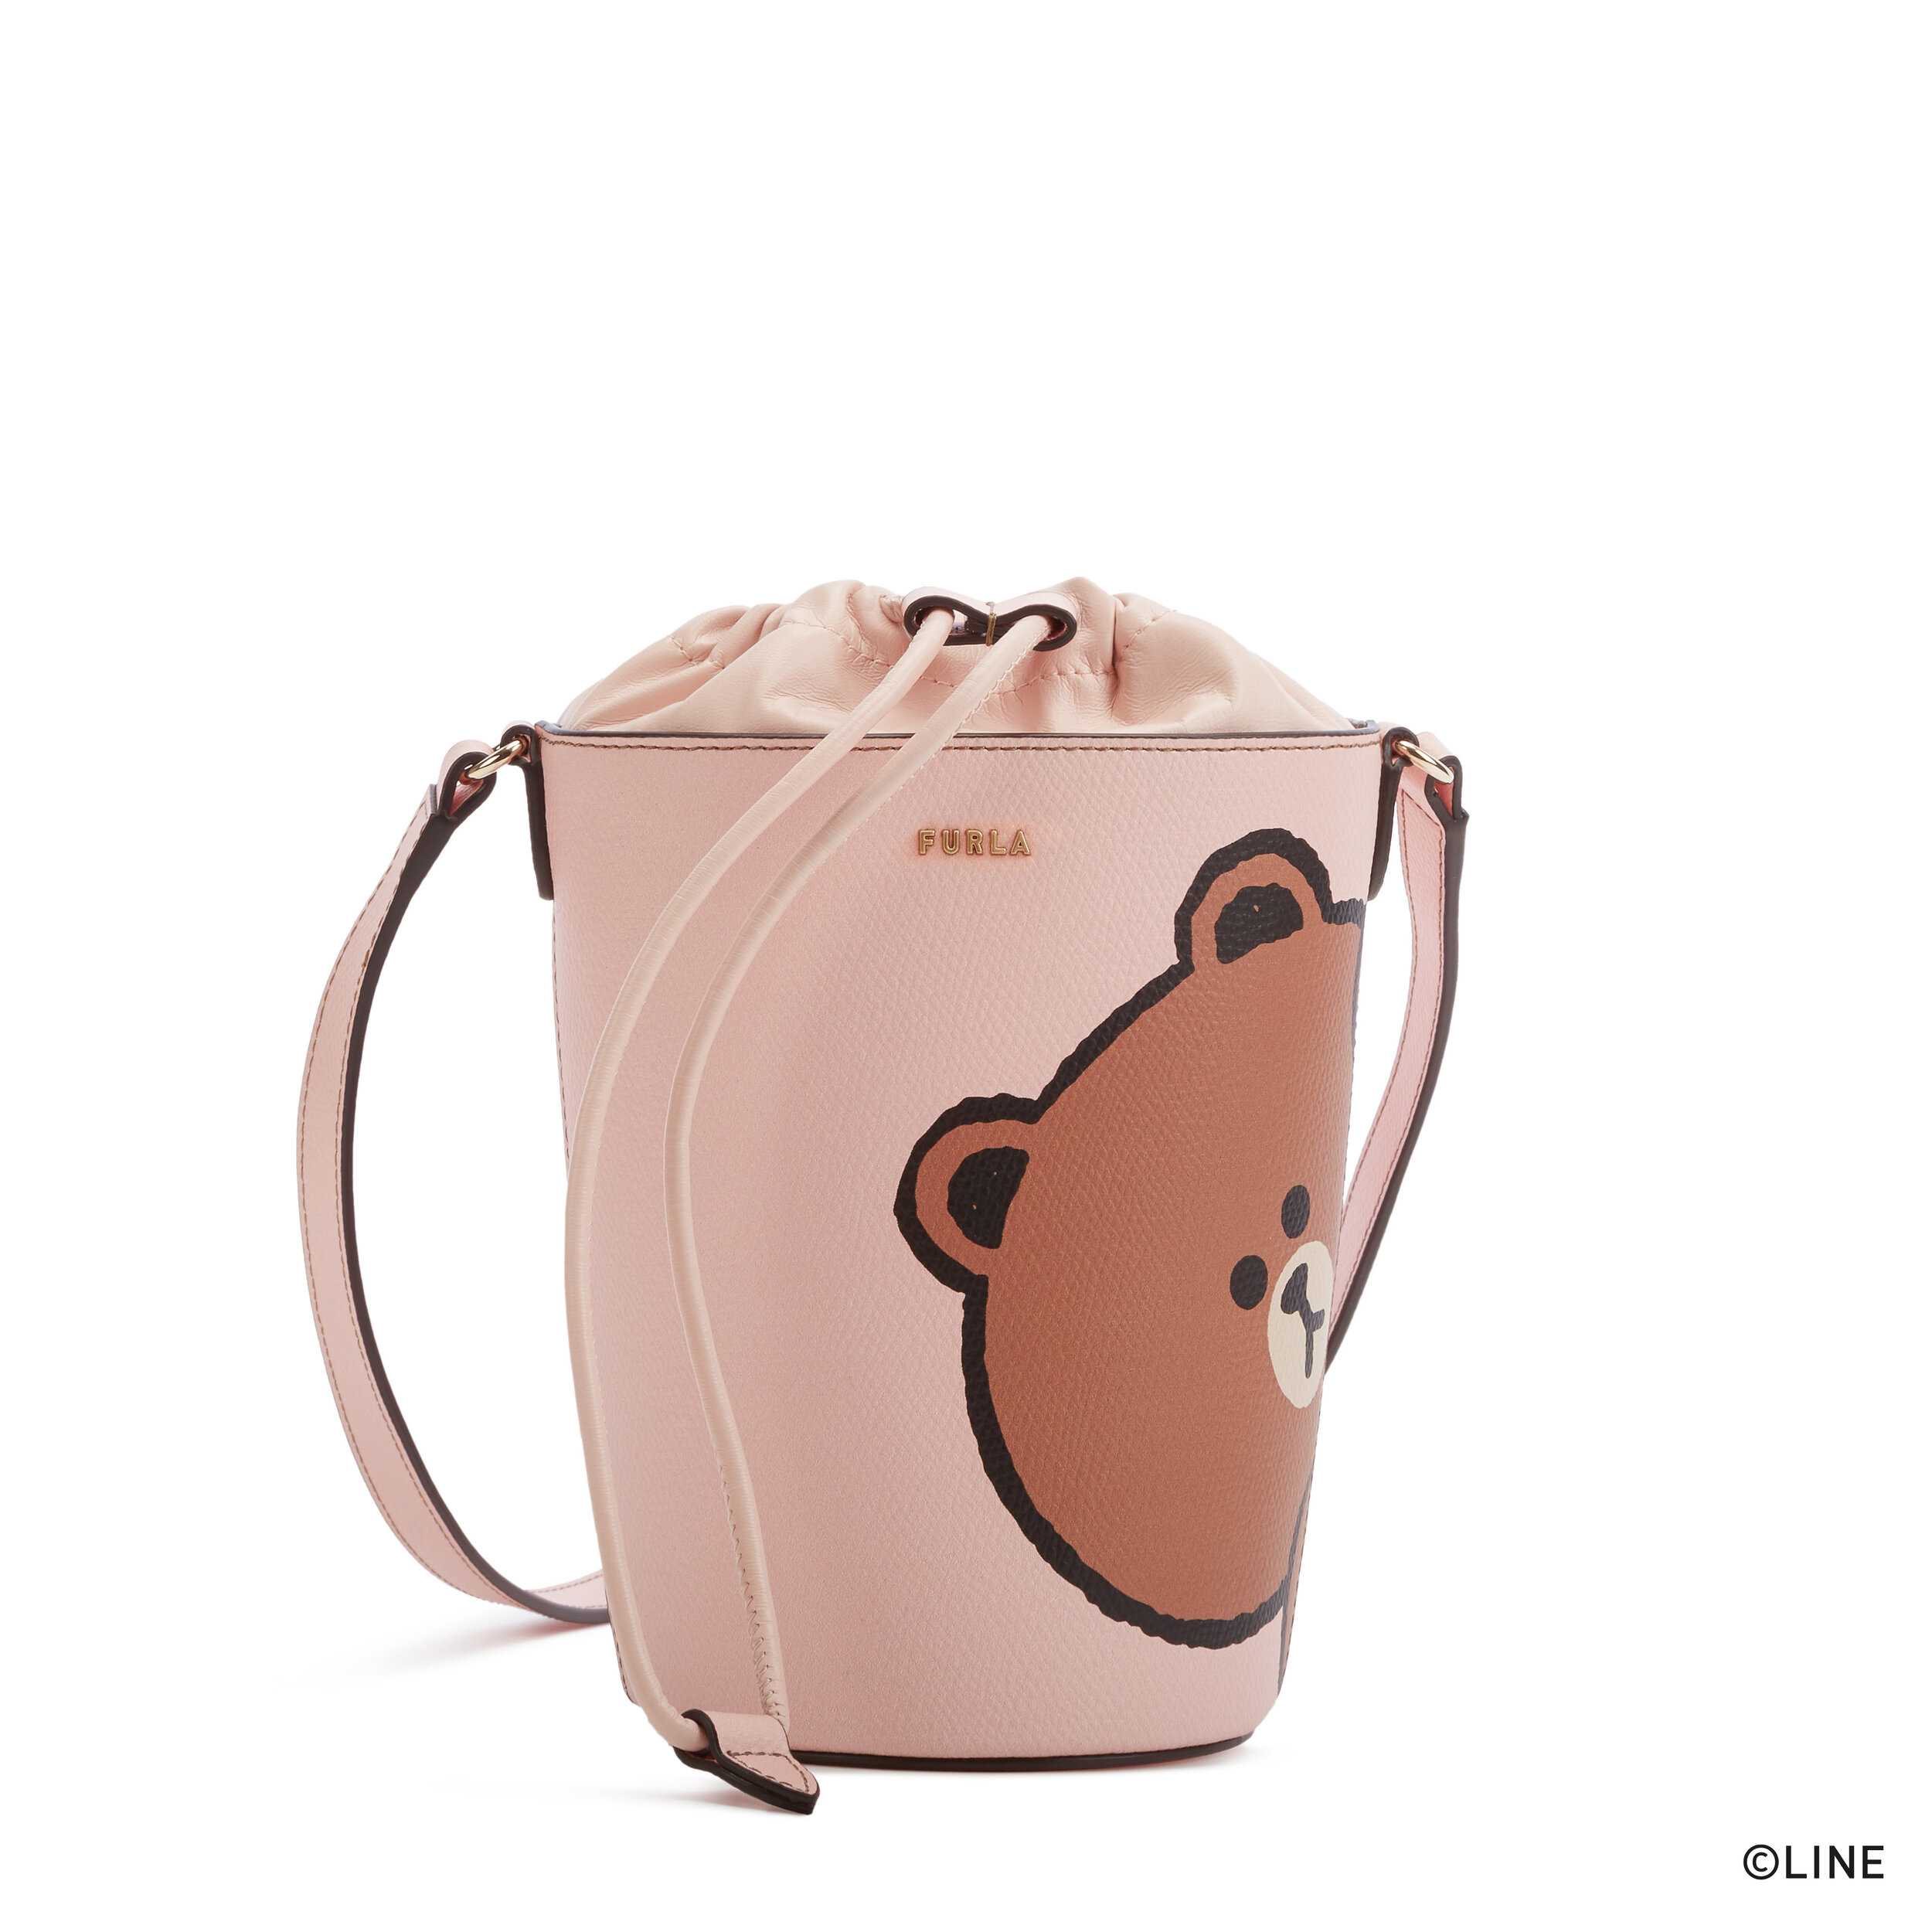 FURLA LINE FRIENDS S BUCKET MINI BAG_BROWN PRINT ON ARES TEXTURED LEATHER_LF-copyright.jpg